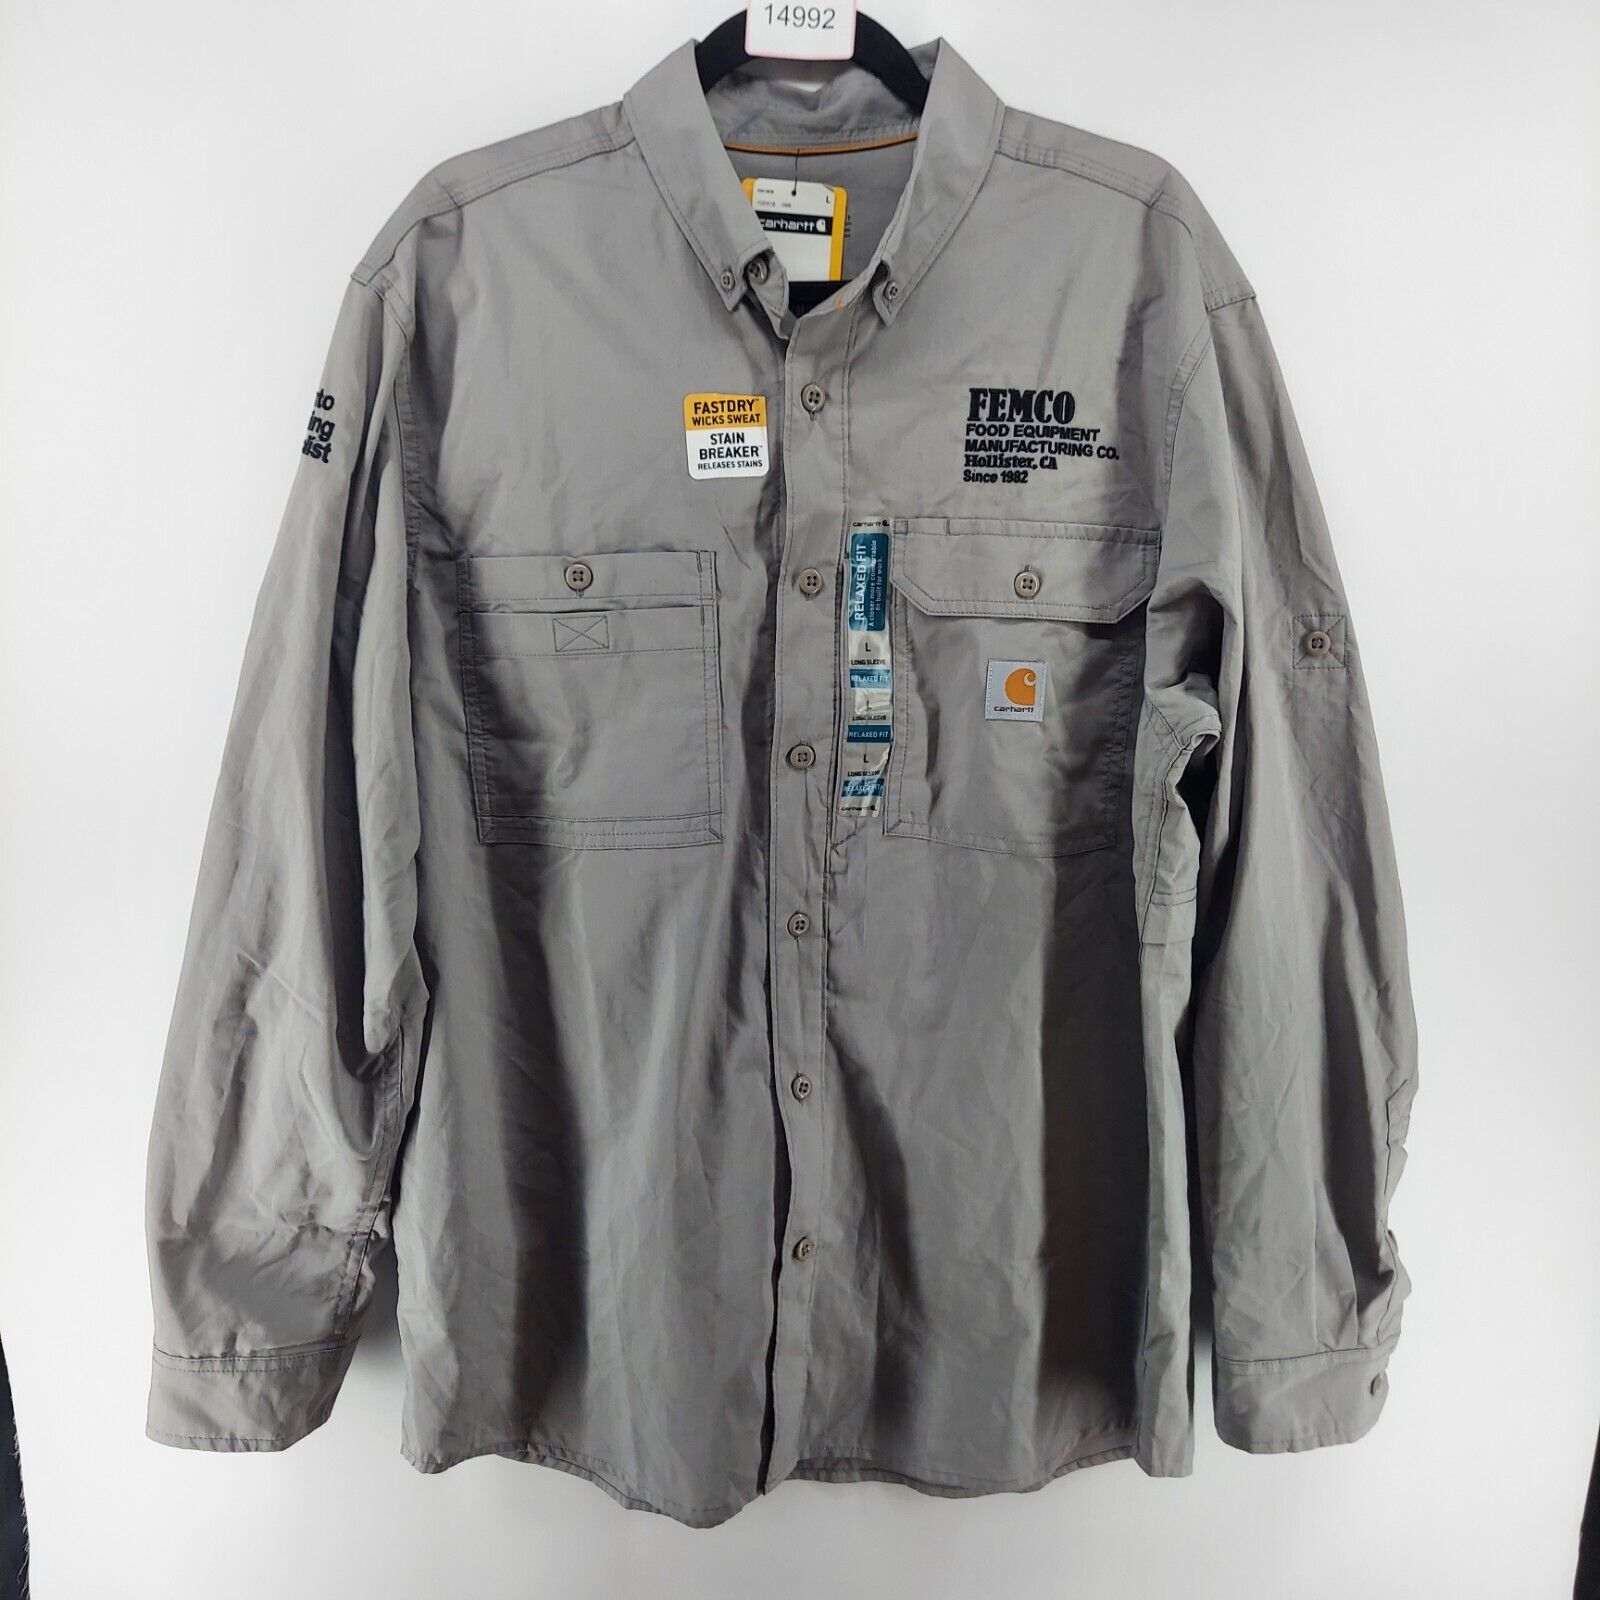 carhartt button up shirt men size Large gray Relaxed fit force long sleeve FEMCO